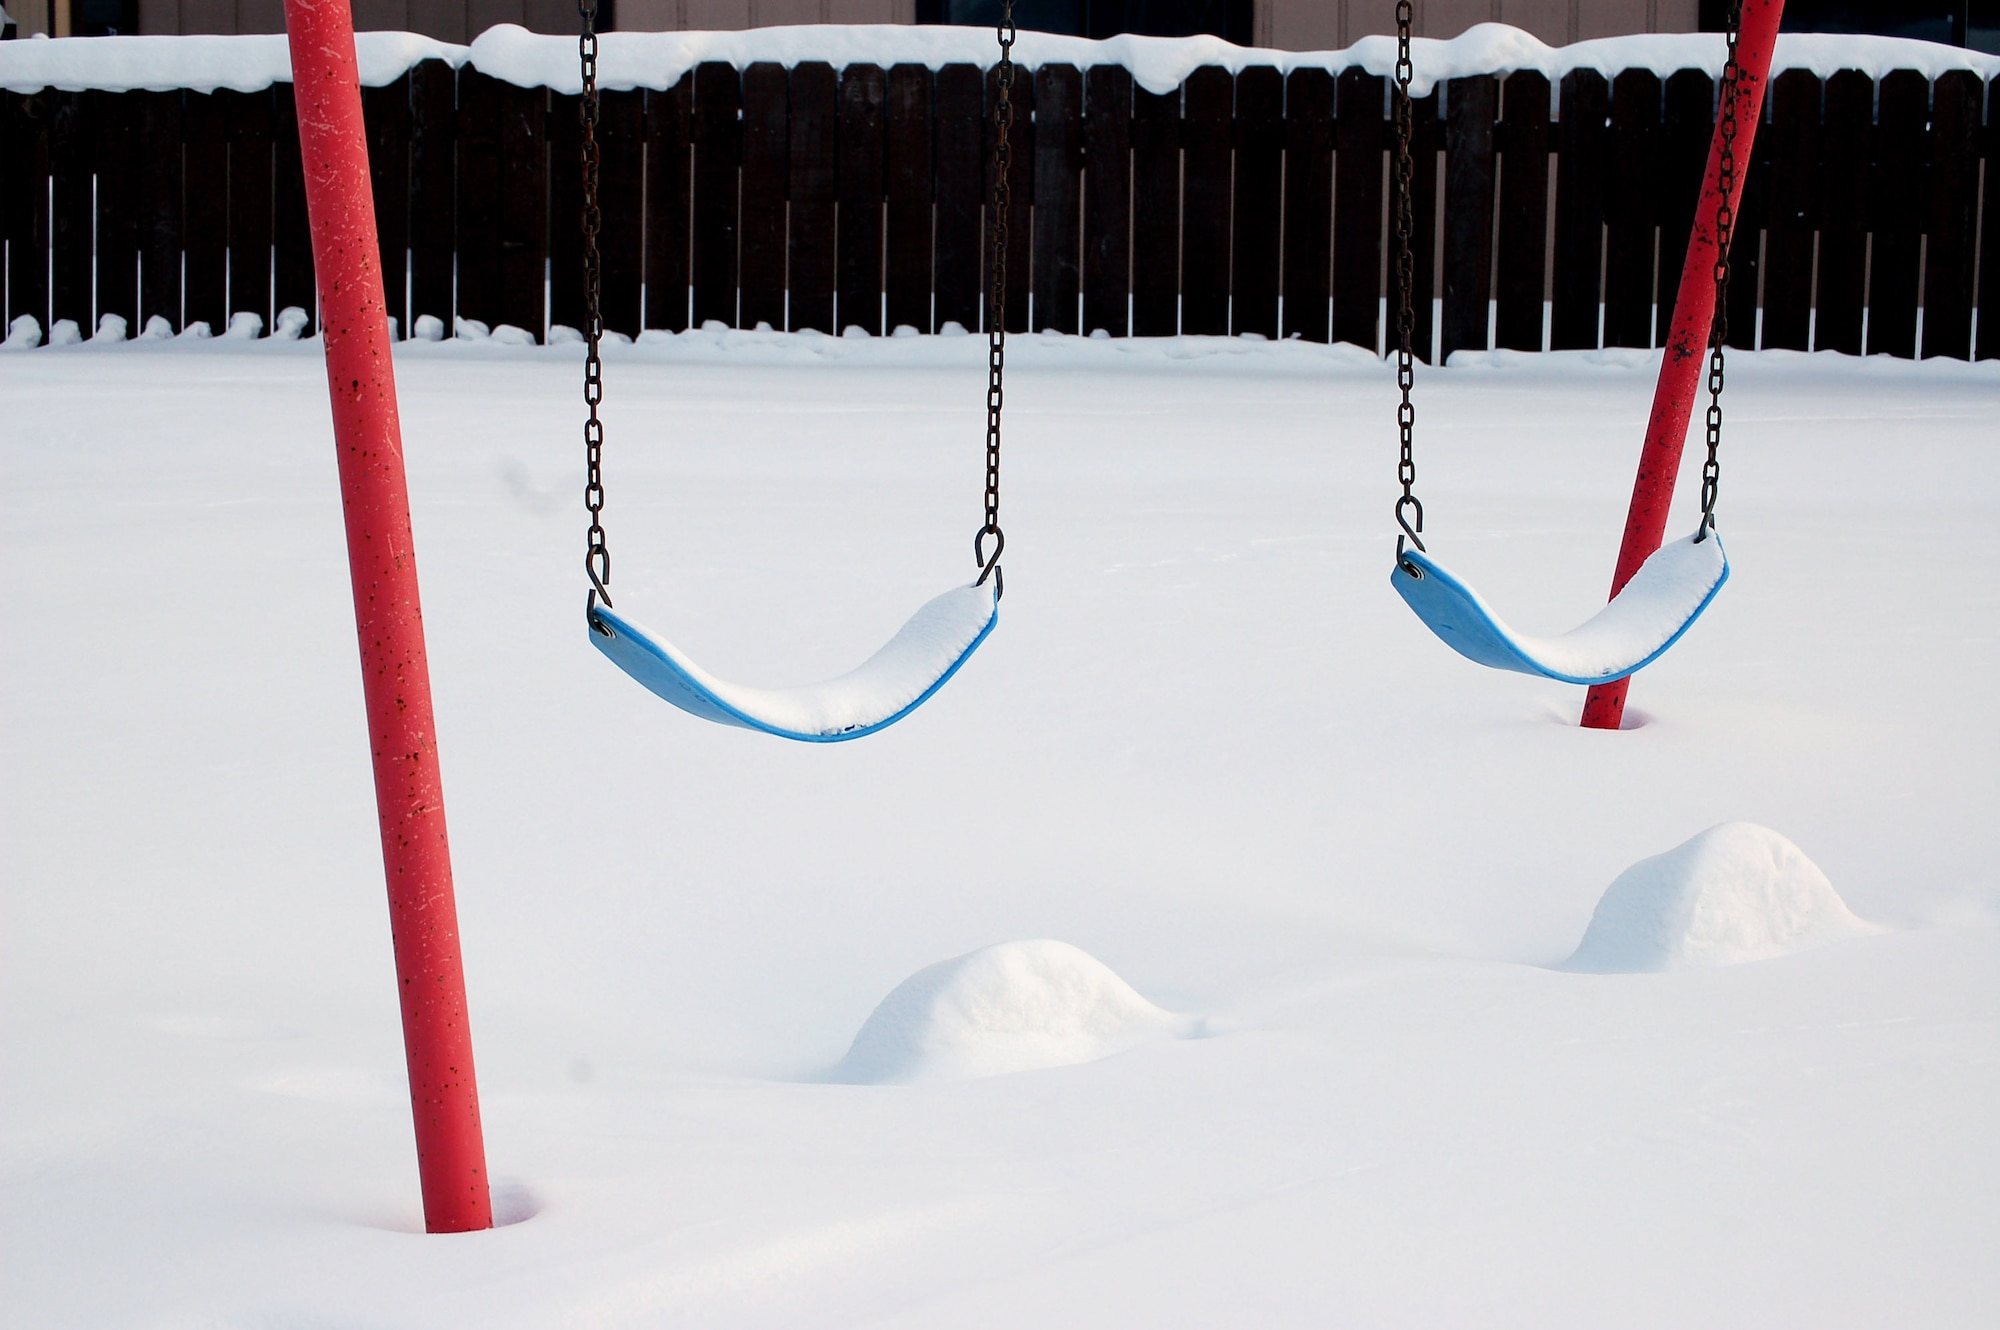 Abandoned swings sit covered in snow in the Sprucewood Homes section of base housing Feb. 27 at Eielson Air Force Base, Alaska. Three hundred Air Force families had to be moved out of the privatized housing into new housing from September to December. The reason for the move was due to a conclusion of a privatized housing contract that wasn't able to be renegotiated. (U.S. Air Force photo/Staff Sgt. Matthew Rosine) 
